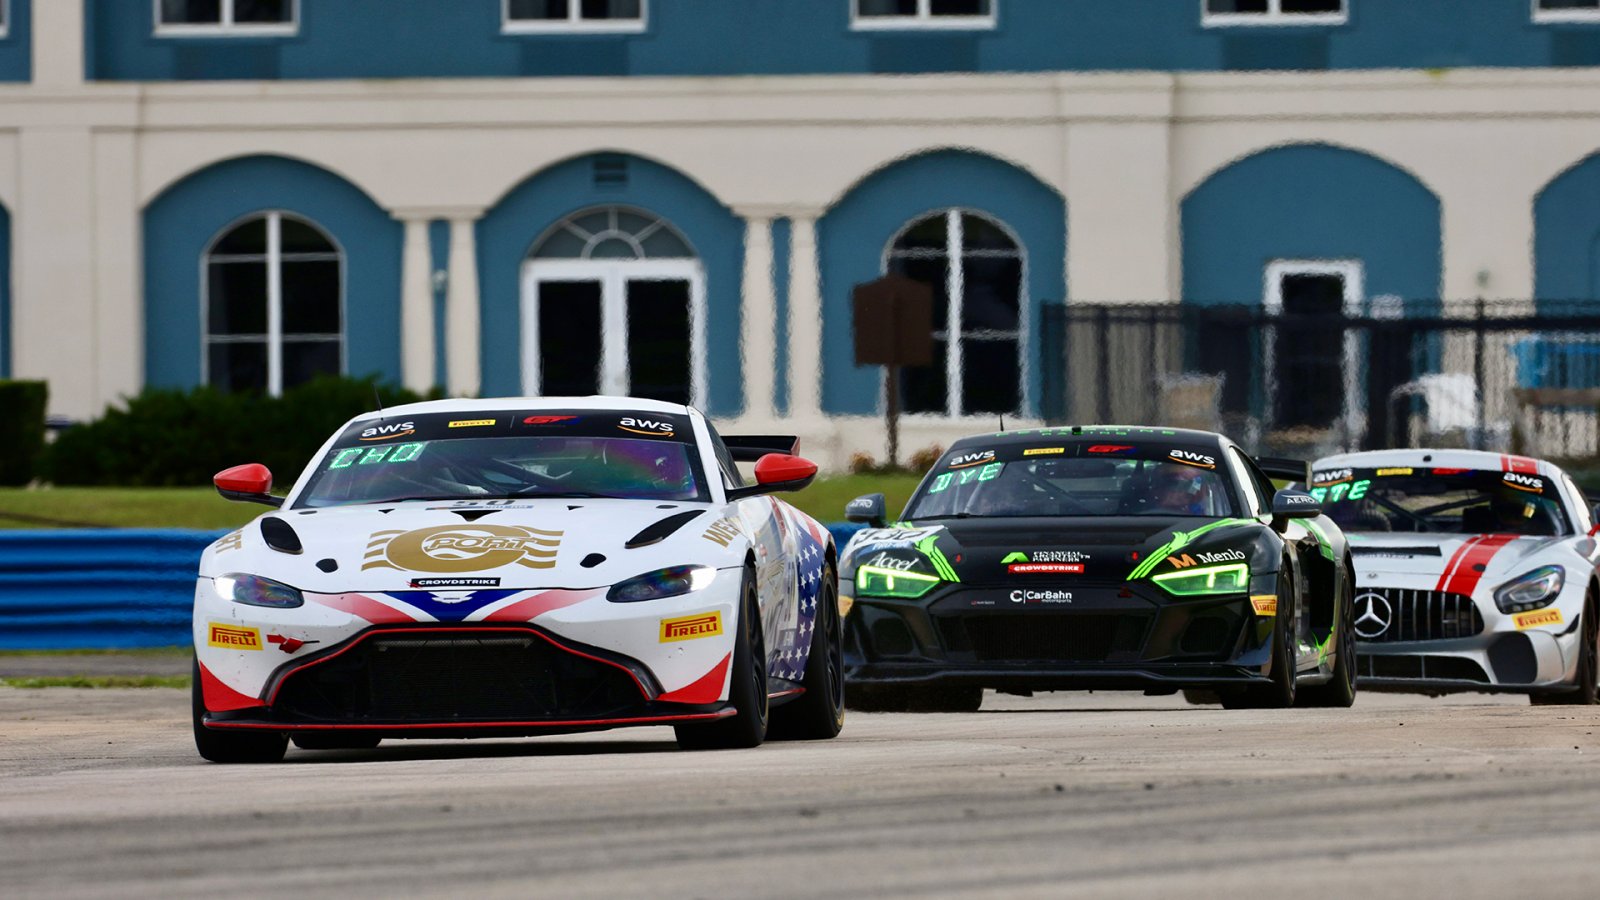 Aston Martin, BMW on Top in Final Practice at Sebring